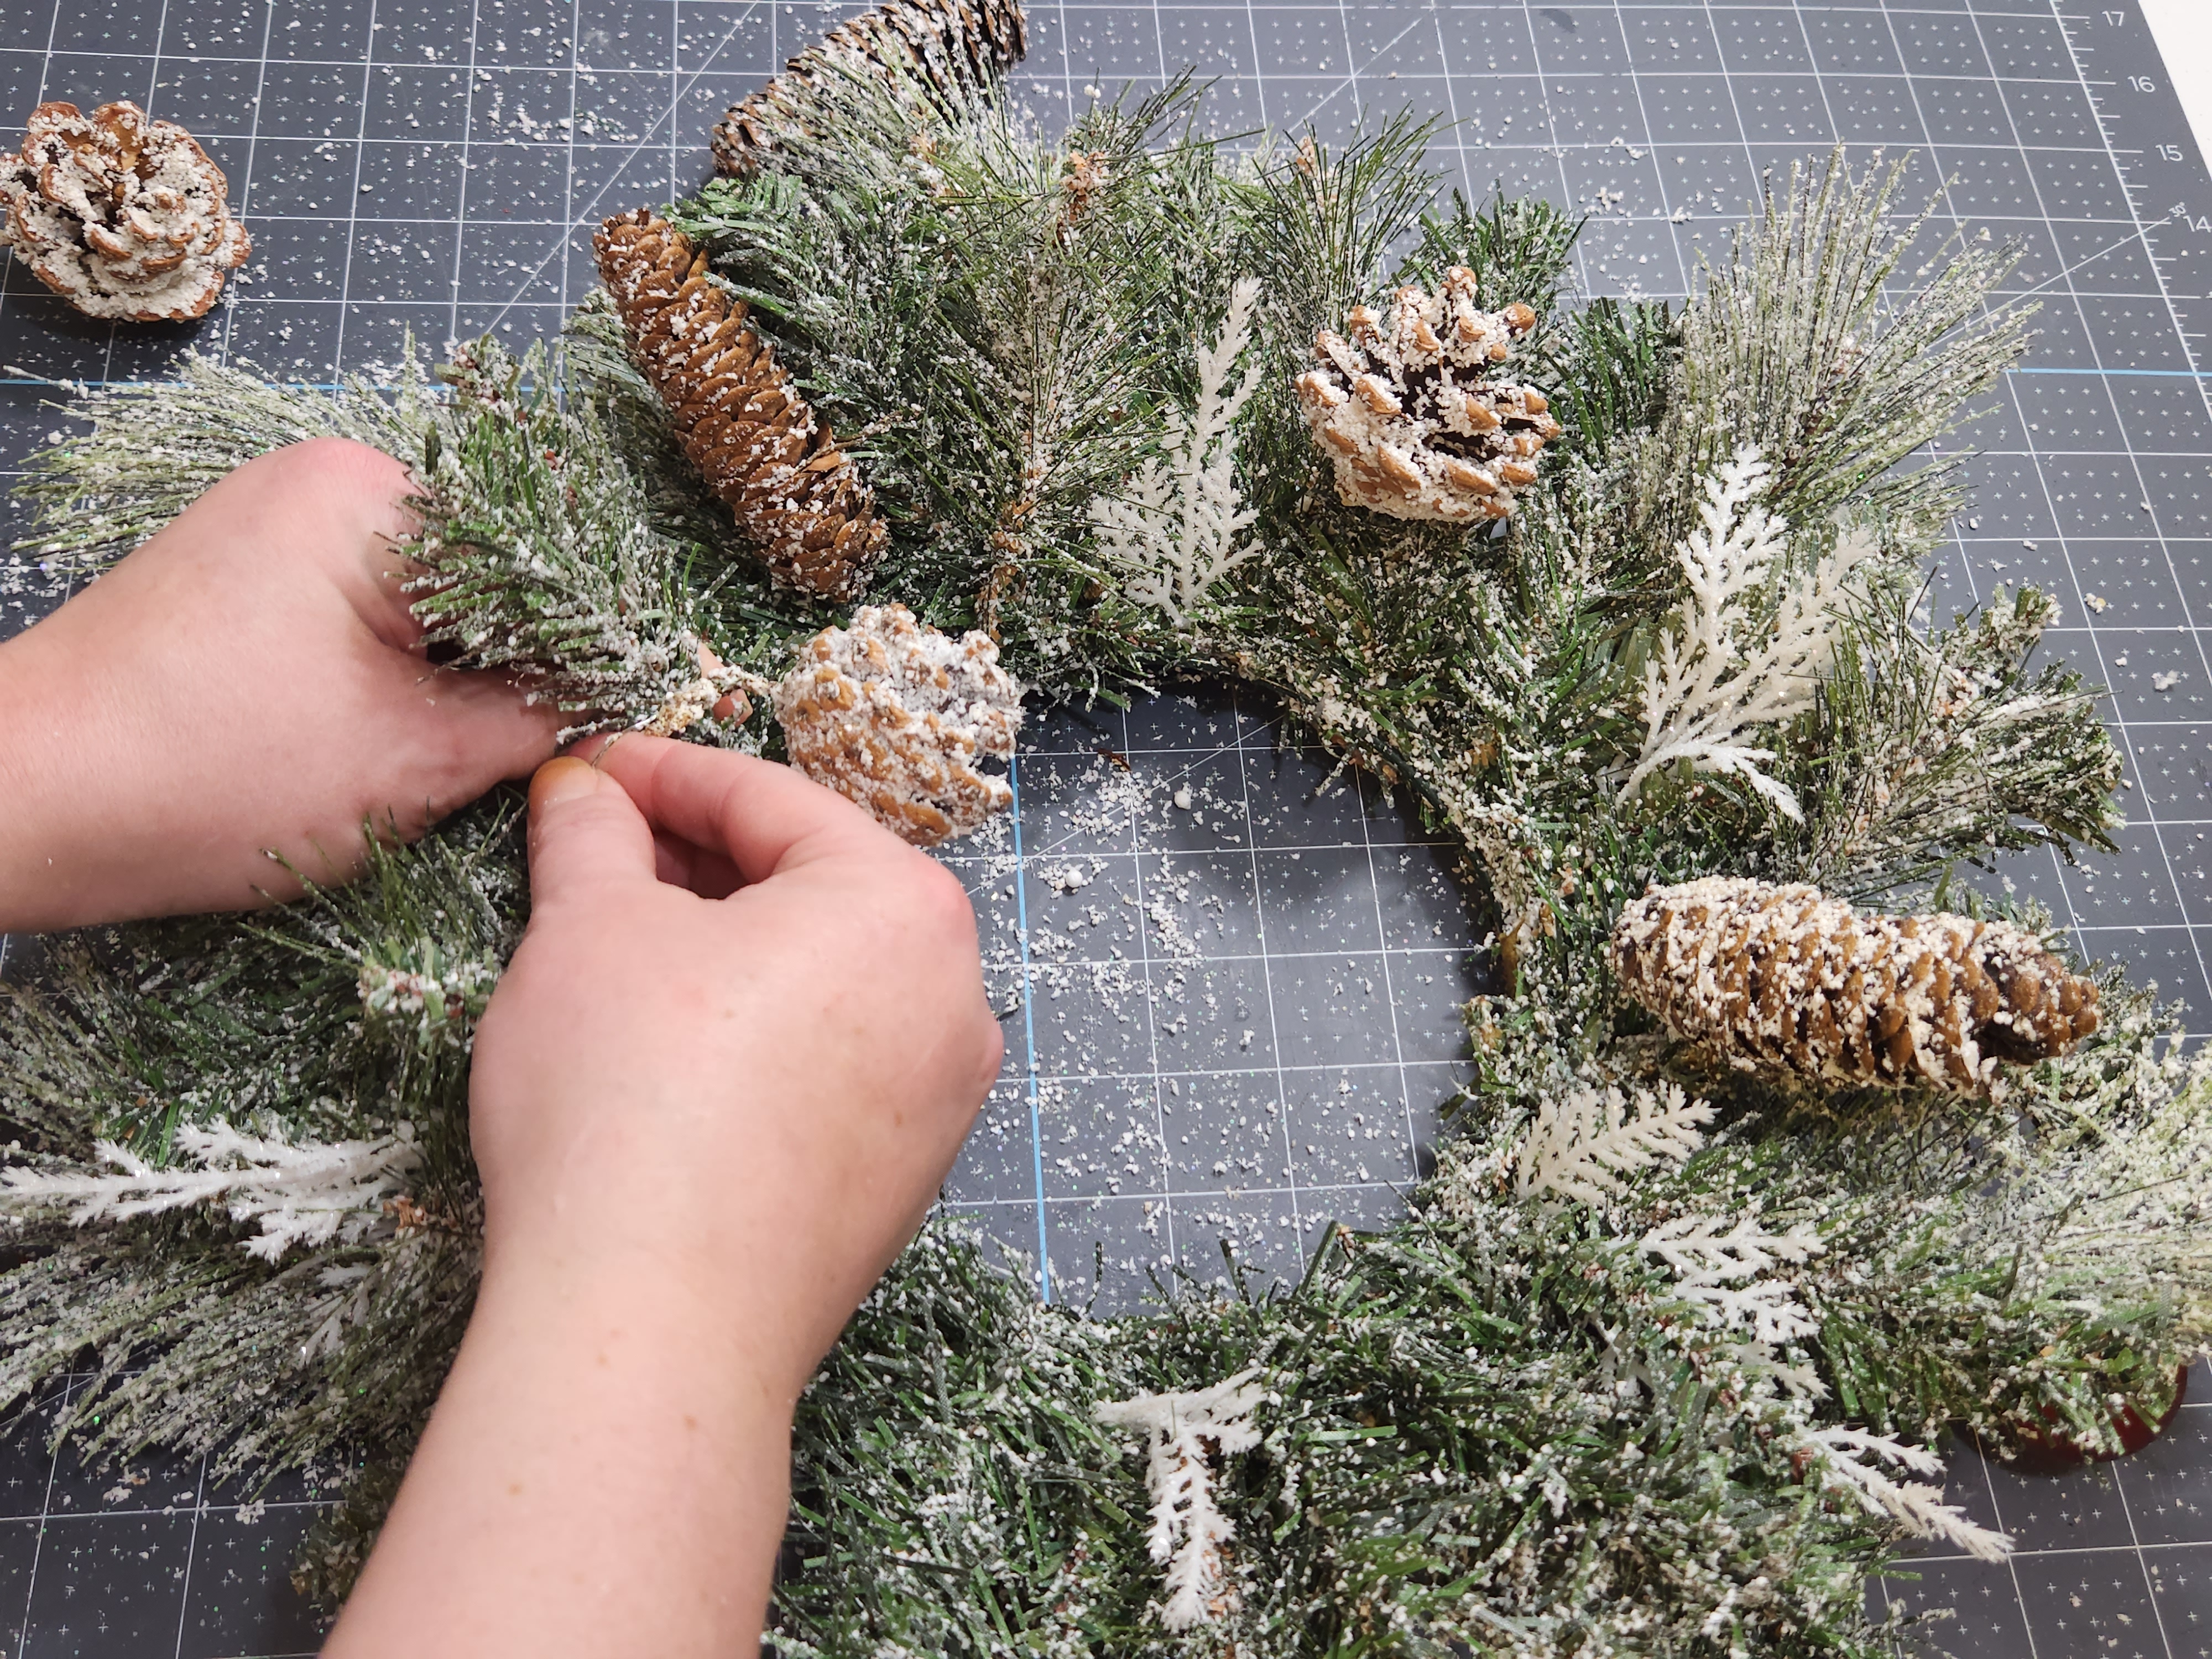 Wrapping a pinecone around the wreath with floral wire.